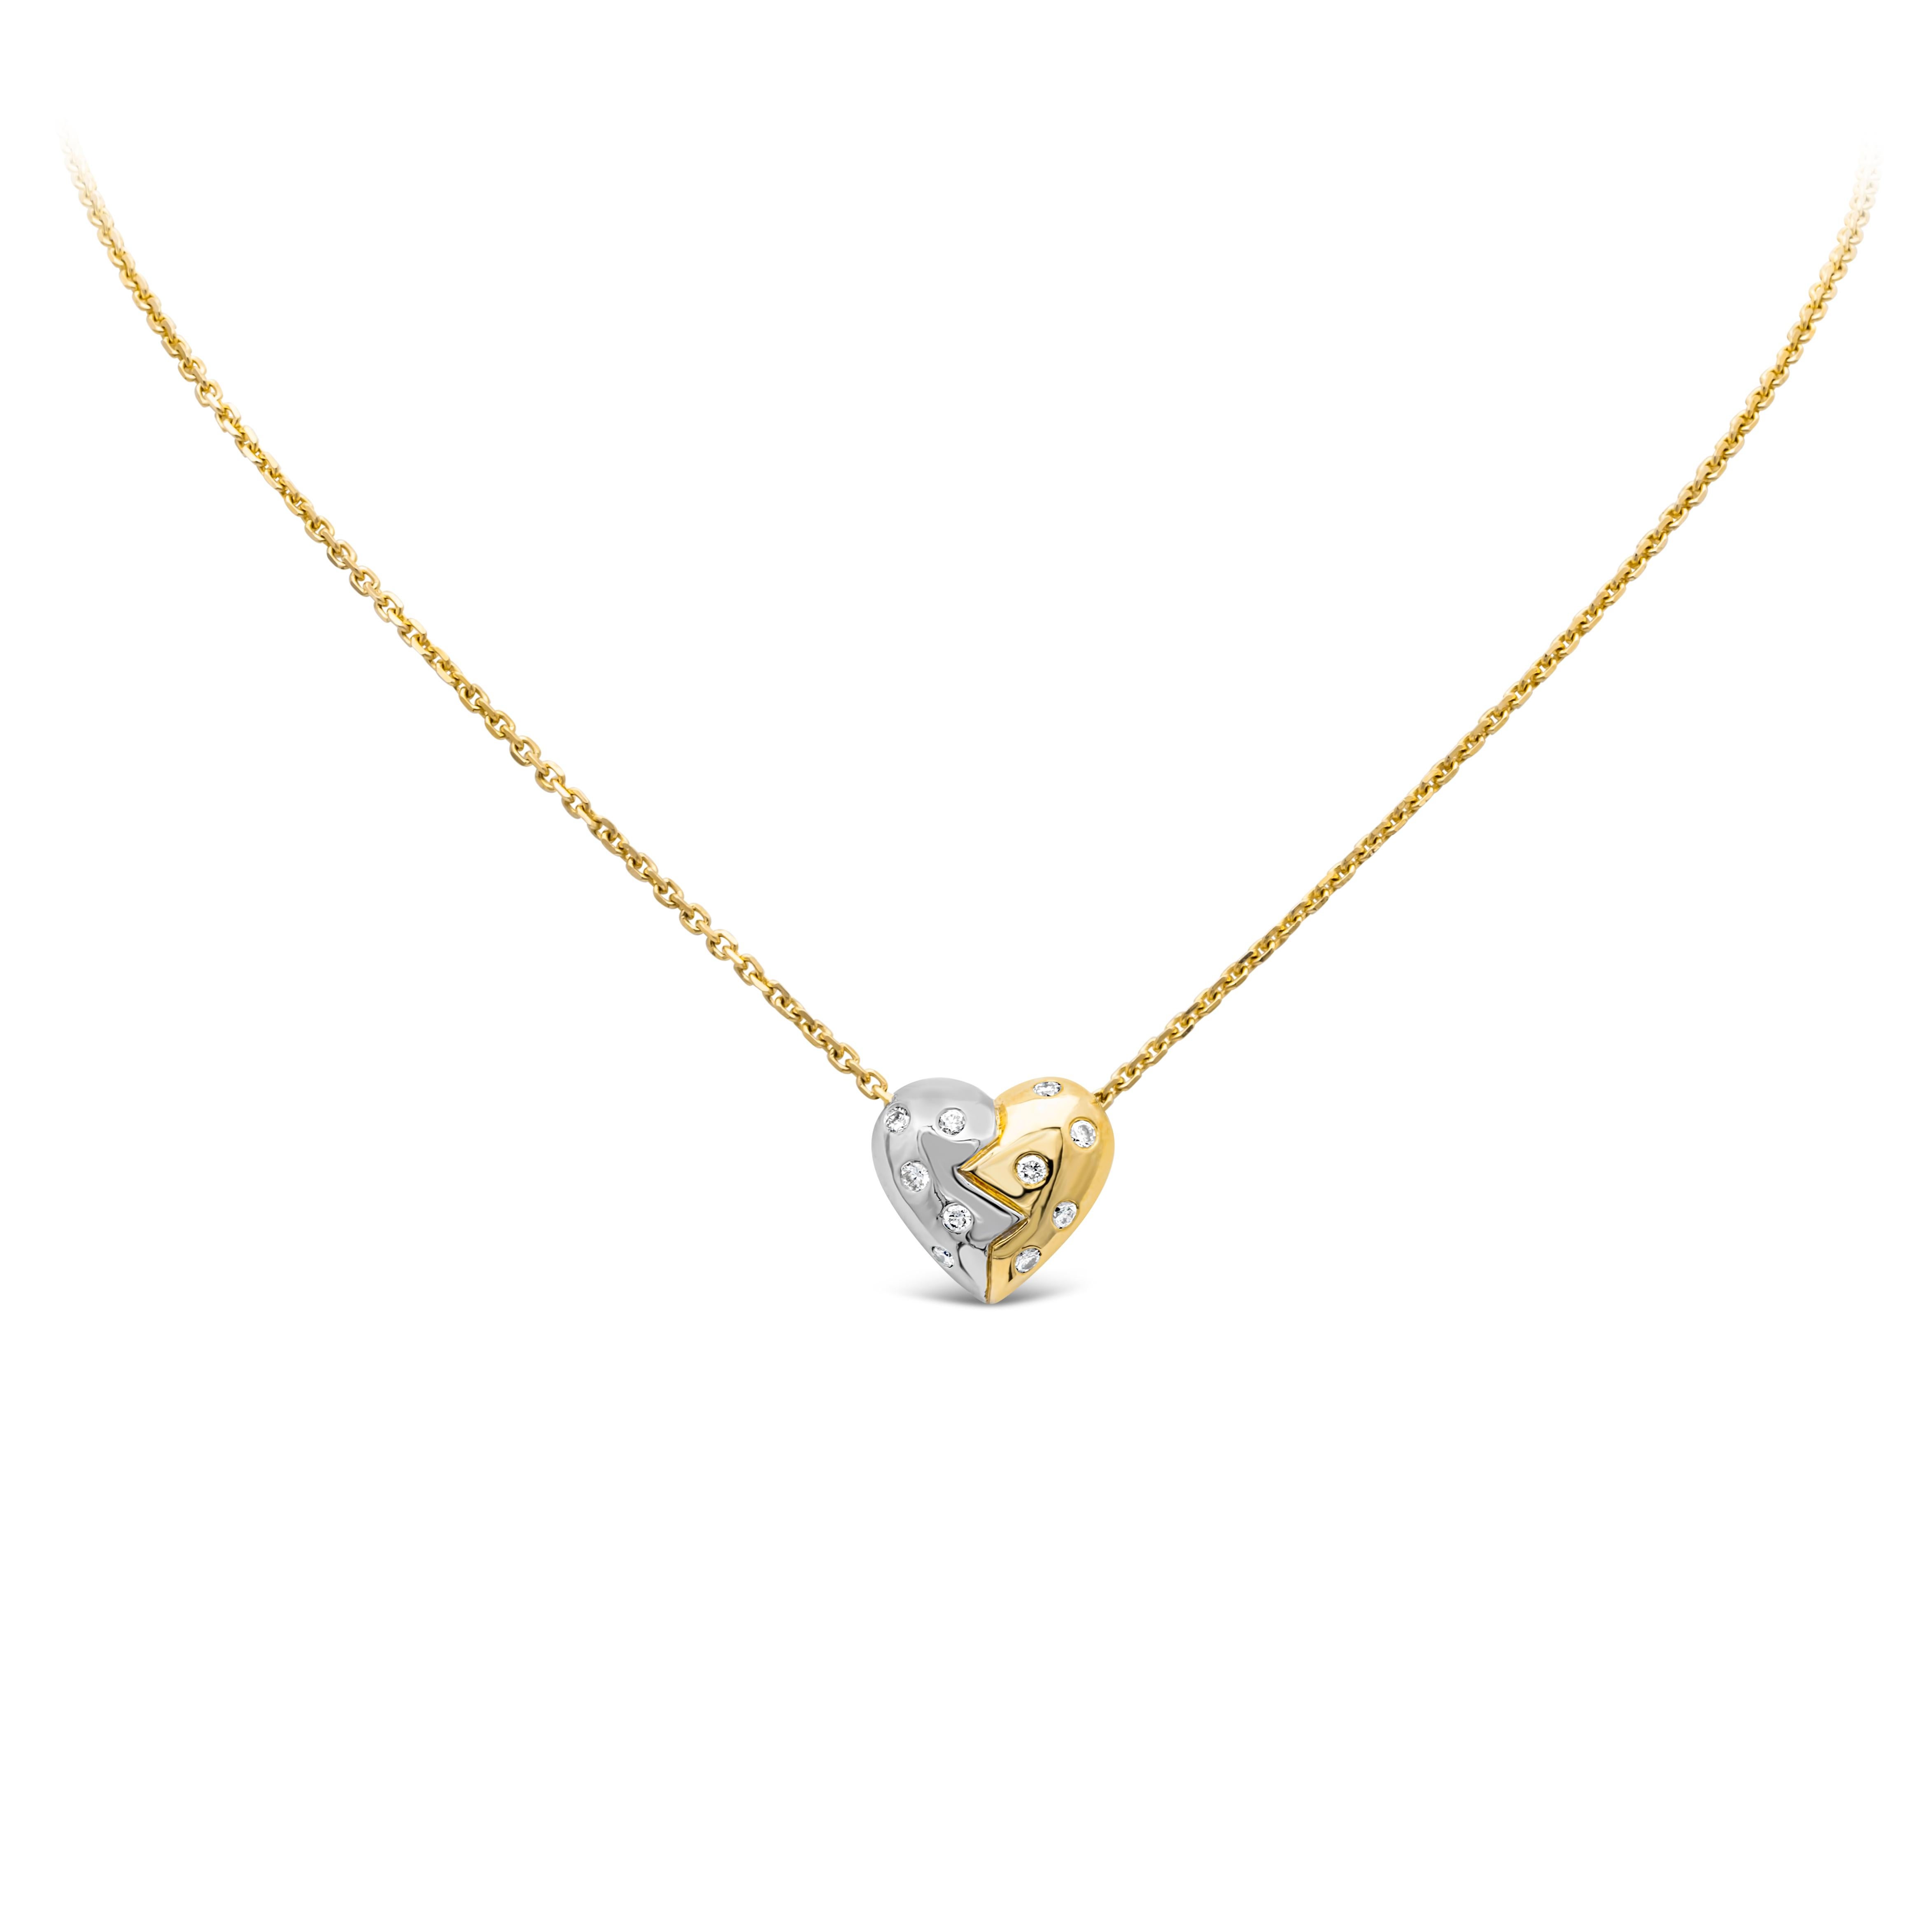 Simple but elegant two tone heart shape pendant necklace accented with 10 brilliant round diamond weighing 0.50 carats total. Finely made in 18K Yellow and White Gold. 17.6 inches in Length.

Roman Malakov is a custom house, specializing in creating